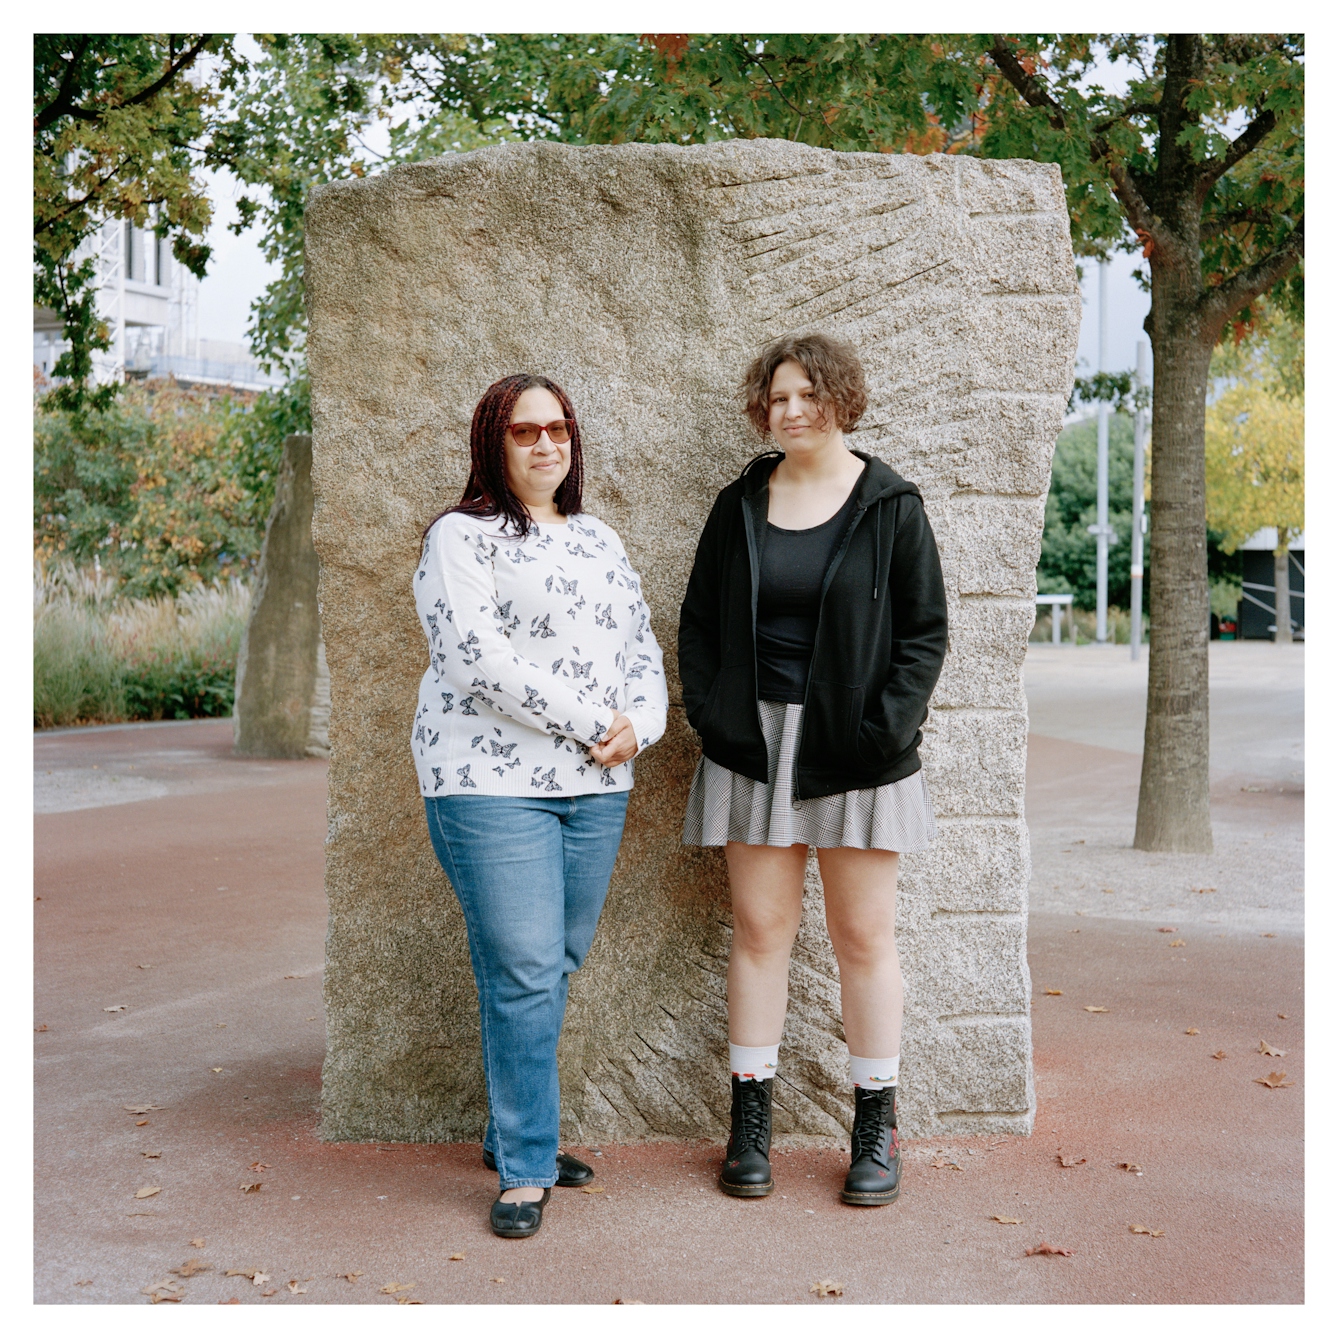 Full-length portrait photograph of two women, Amanda and Sophie, standing against a large rock in a park.  

The woman on the left has long braided hair and is wearing sunglasses, a white patterned top and blue jeans. She is looking at the camera and is smiling slightly. 

The woman on the right has short curly hair and is wearing a black zipped jumper, black t-shirt, grey short skirt and boots. She is also looking at the camera with a slight smile. 

Behind them there are several trees and plants in the park, the ground is tarmac. 